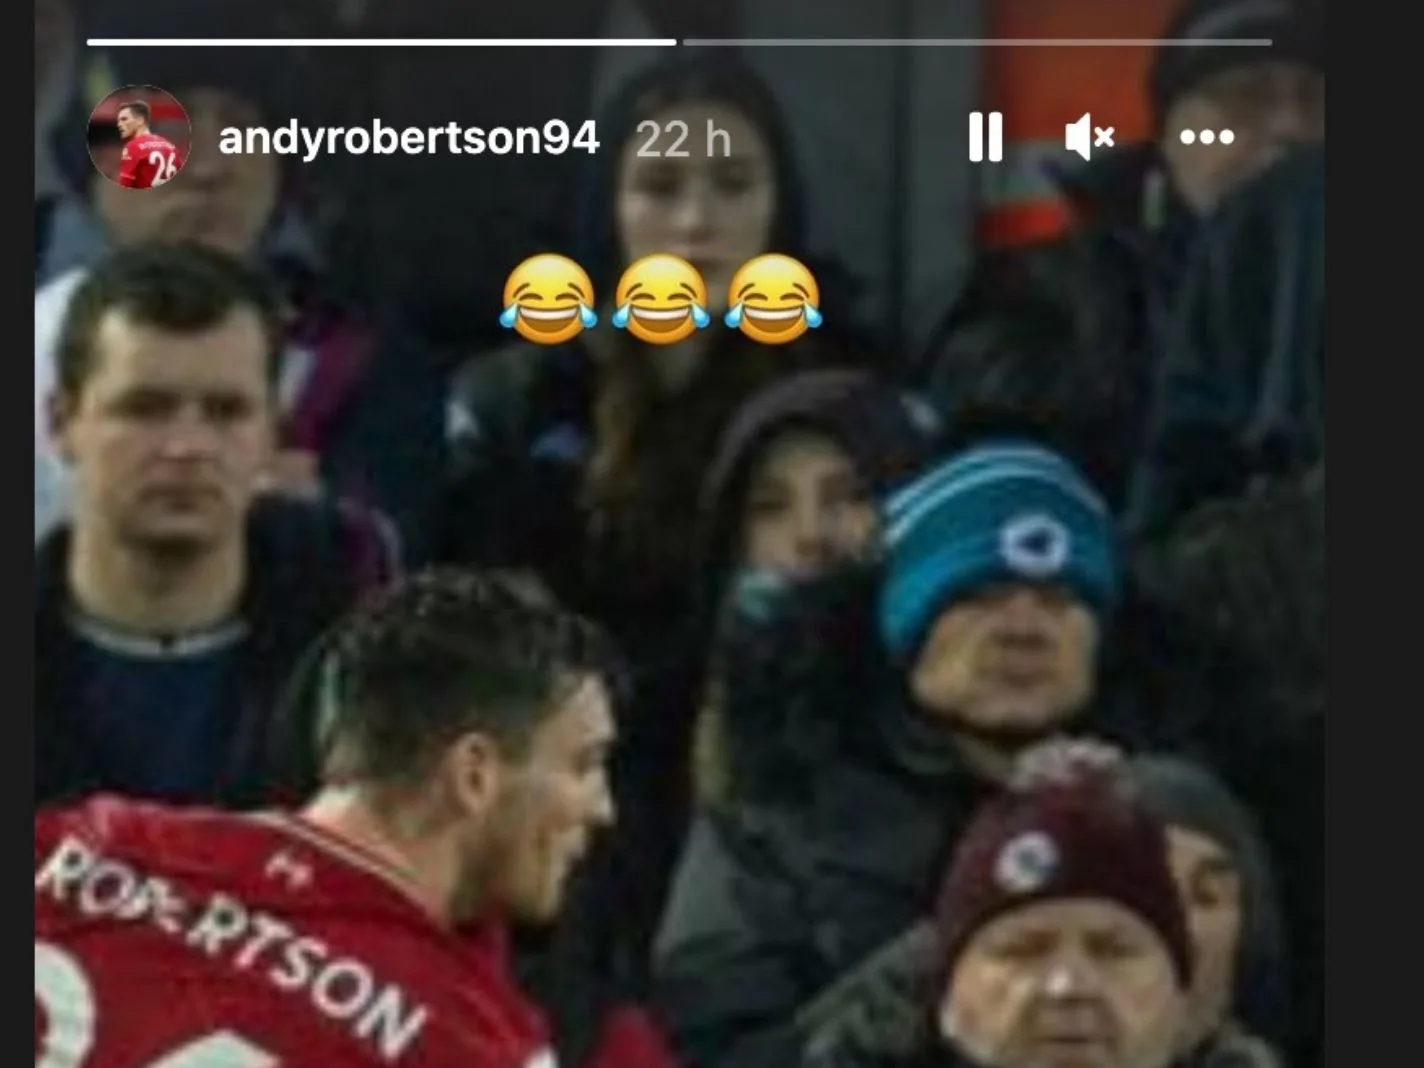 Andy Robertson posts photo of him appearing to nipple-twist a barechested Liverpool fan as Instagram story